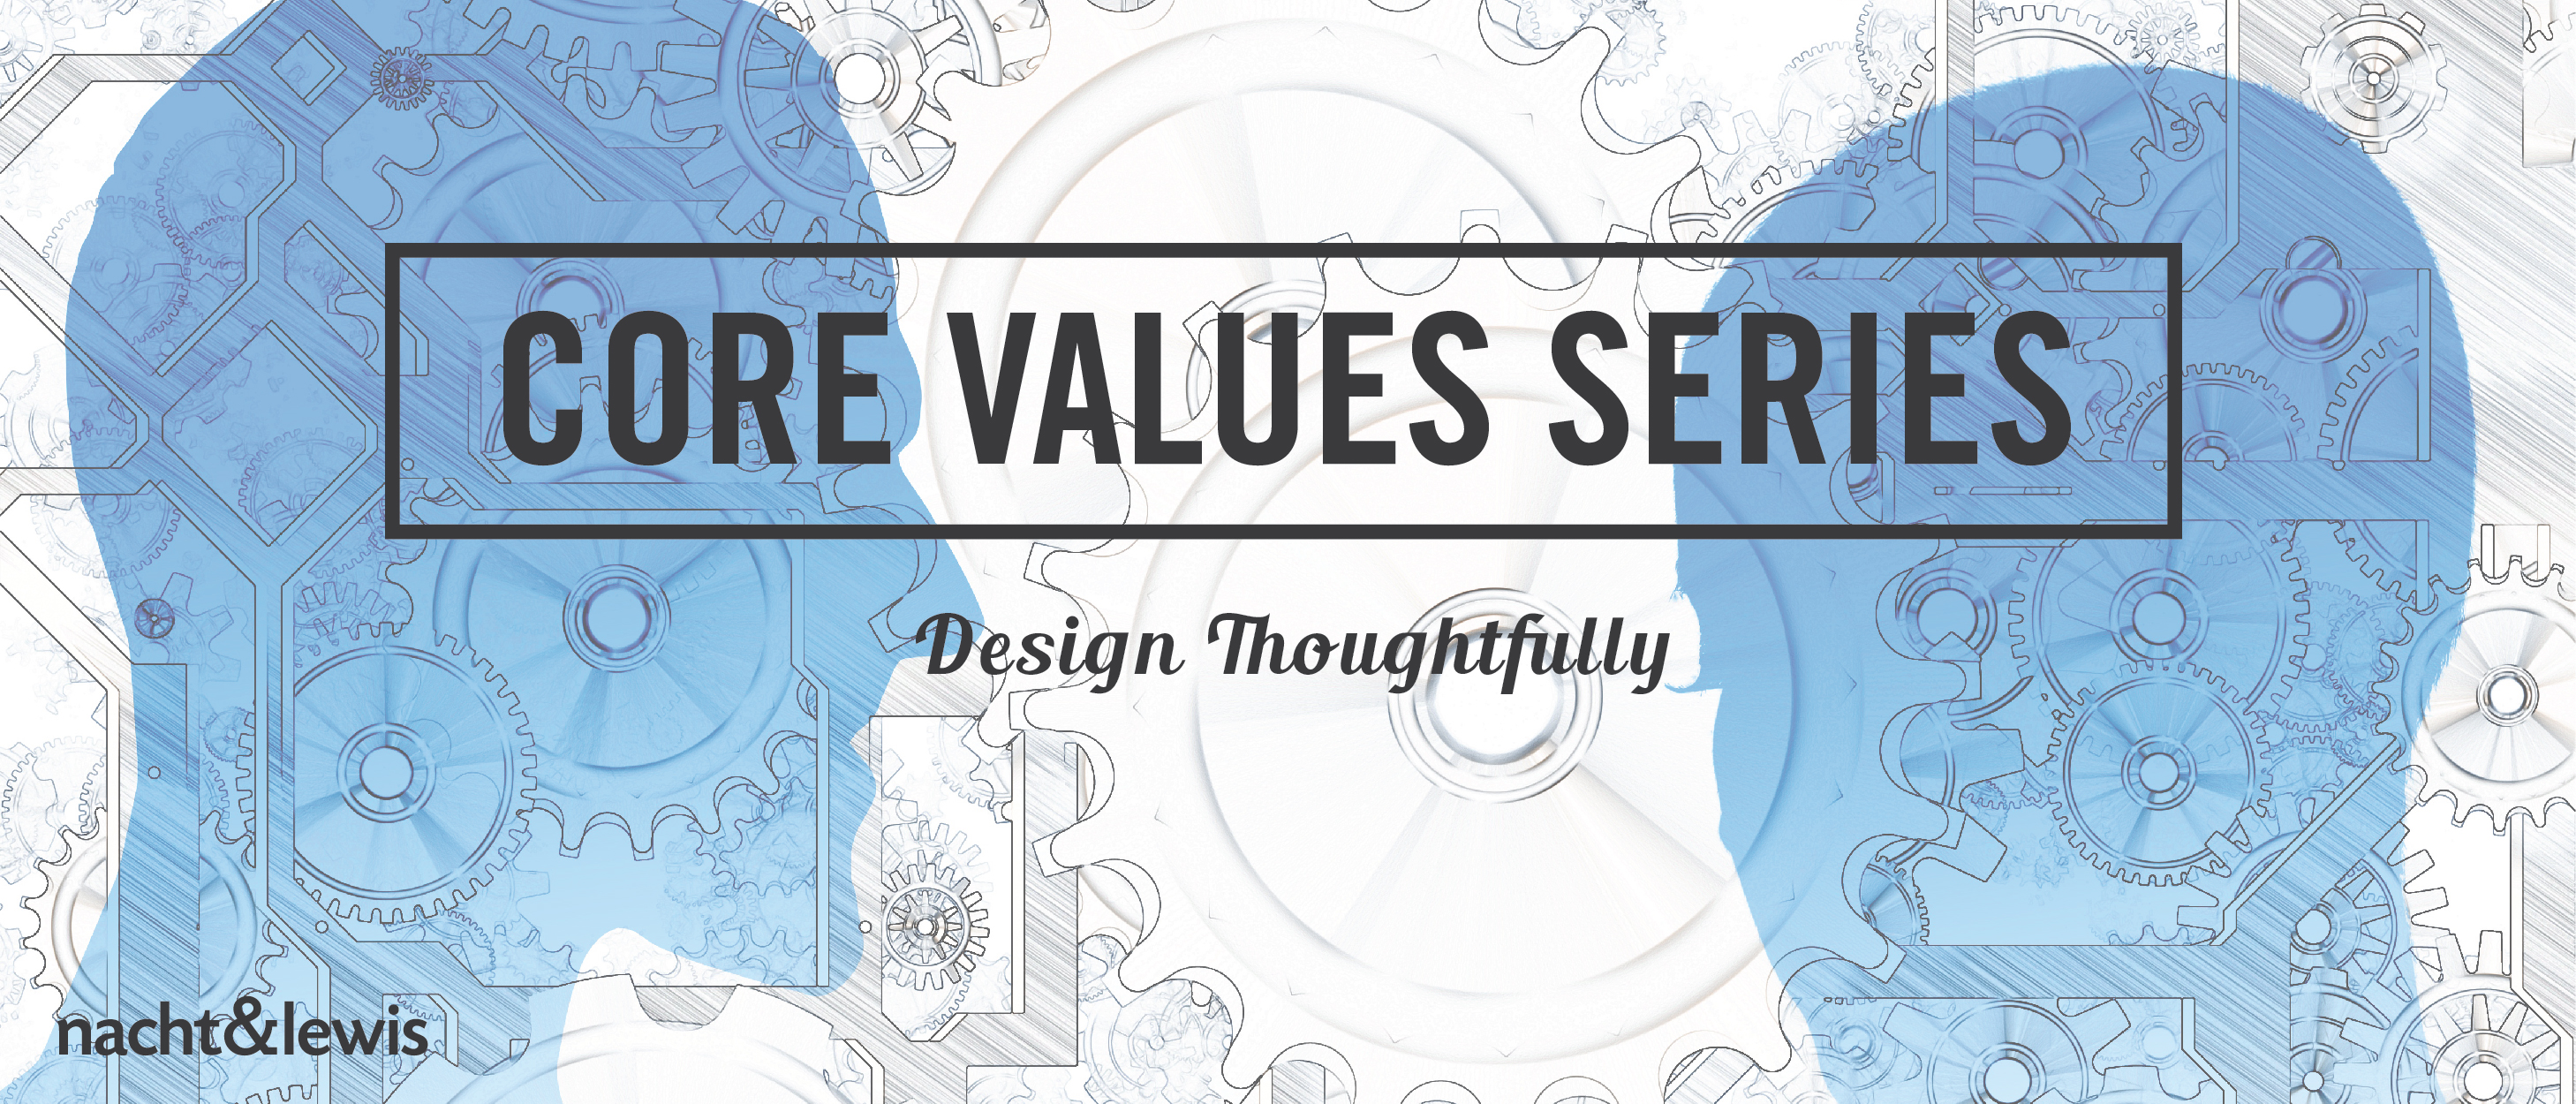 Core Values Series: Design Thoughtfully